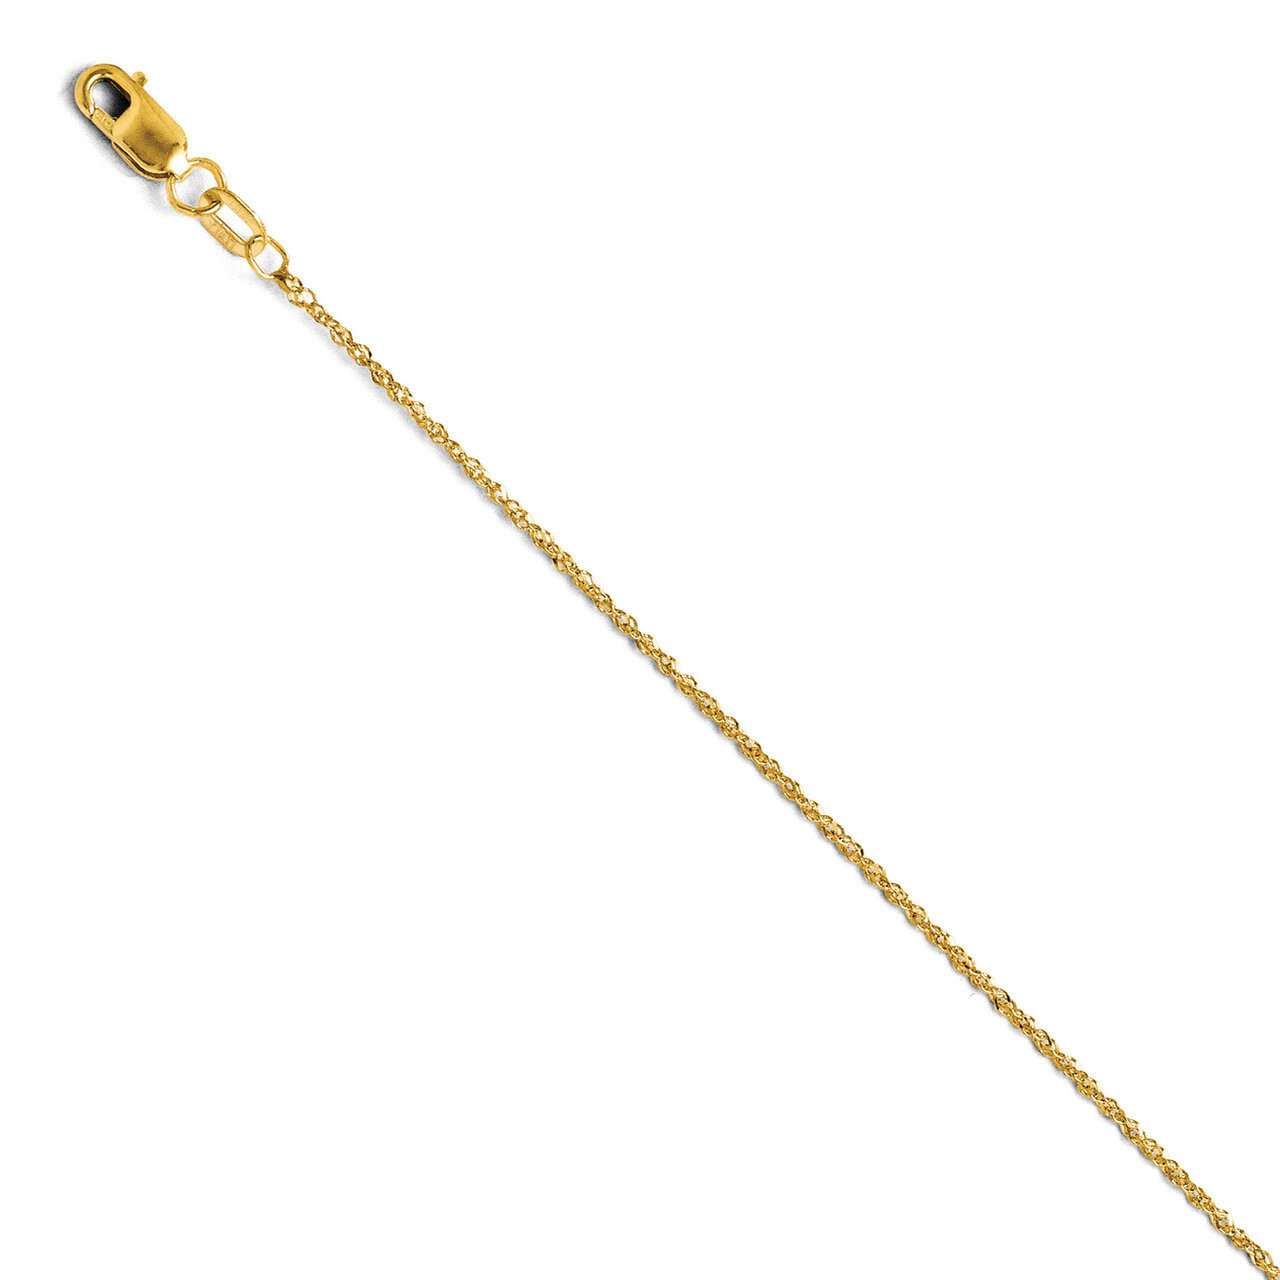 Sparkle Singapore Chain 20 Inch - 14k Gold HB-1828-20